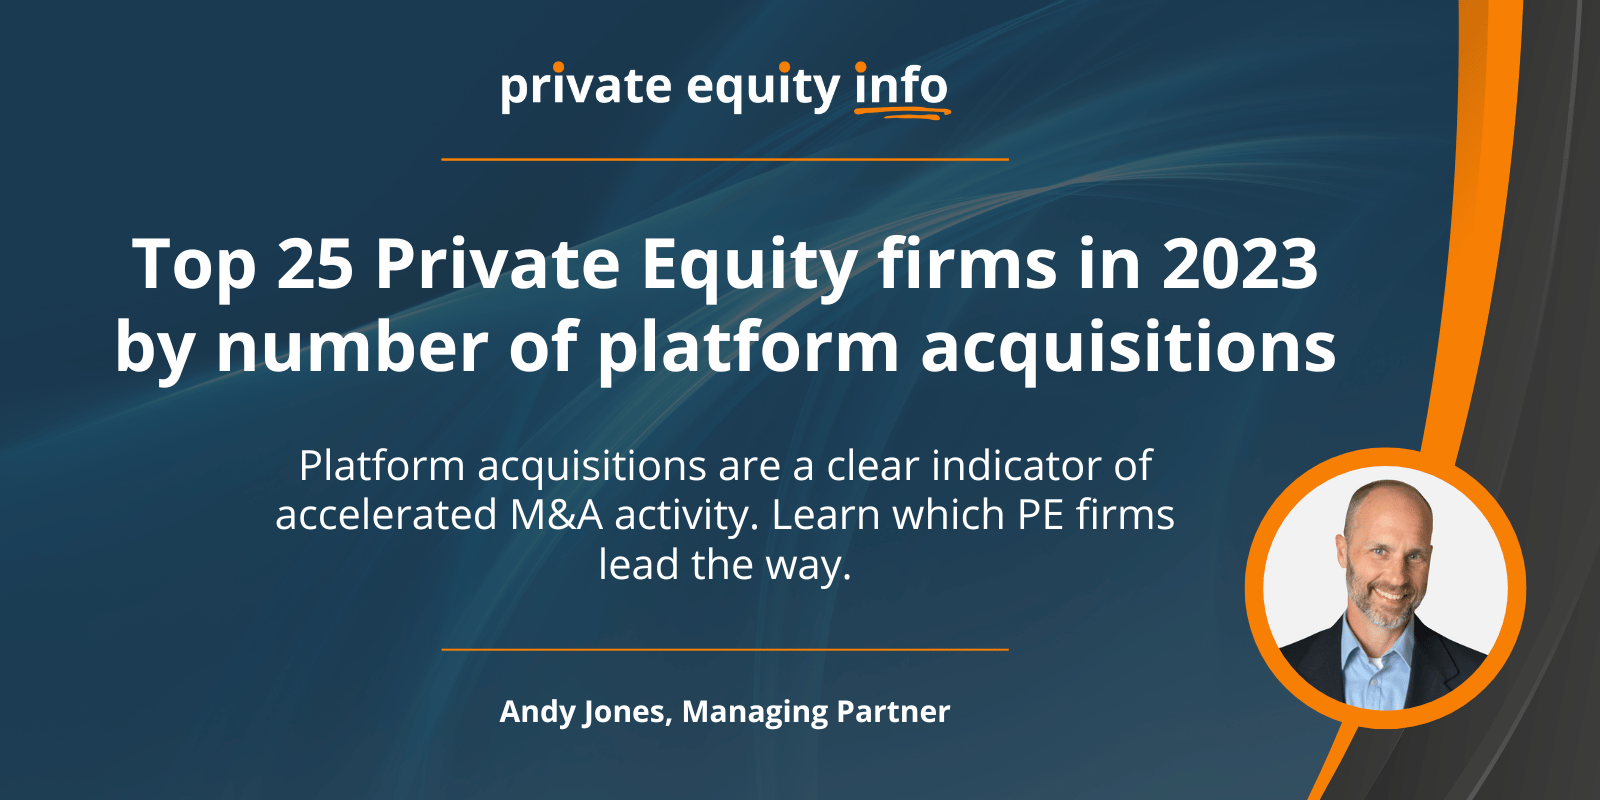 Top 25 Private Equity firms in 2023 by number of platform acquisitions | Private Equity Info Shop